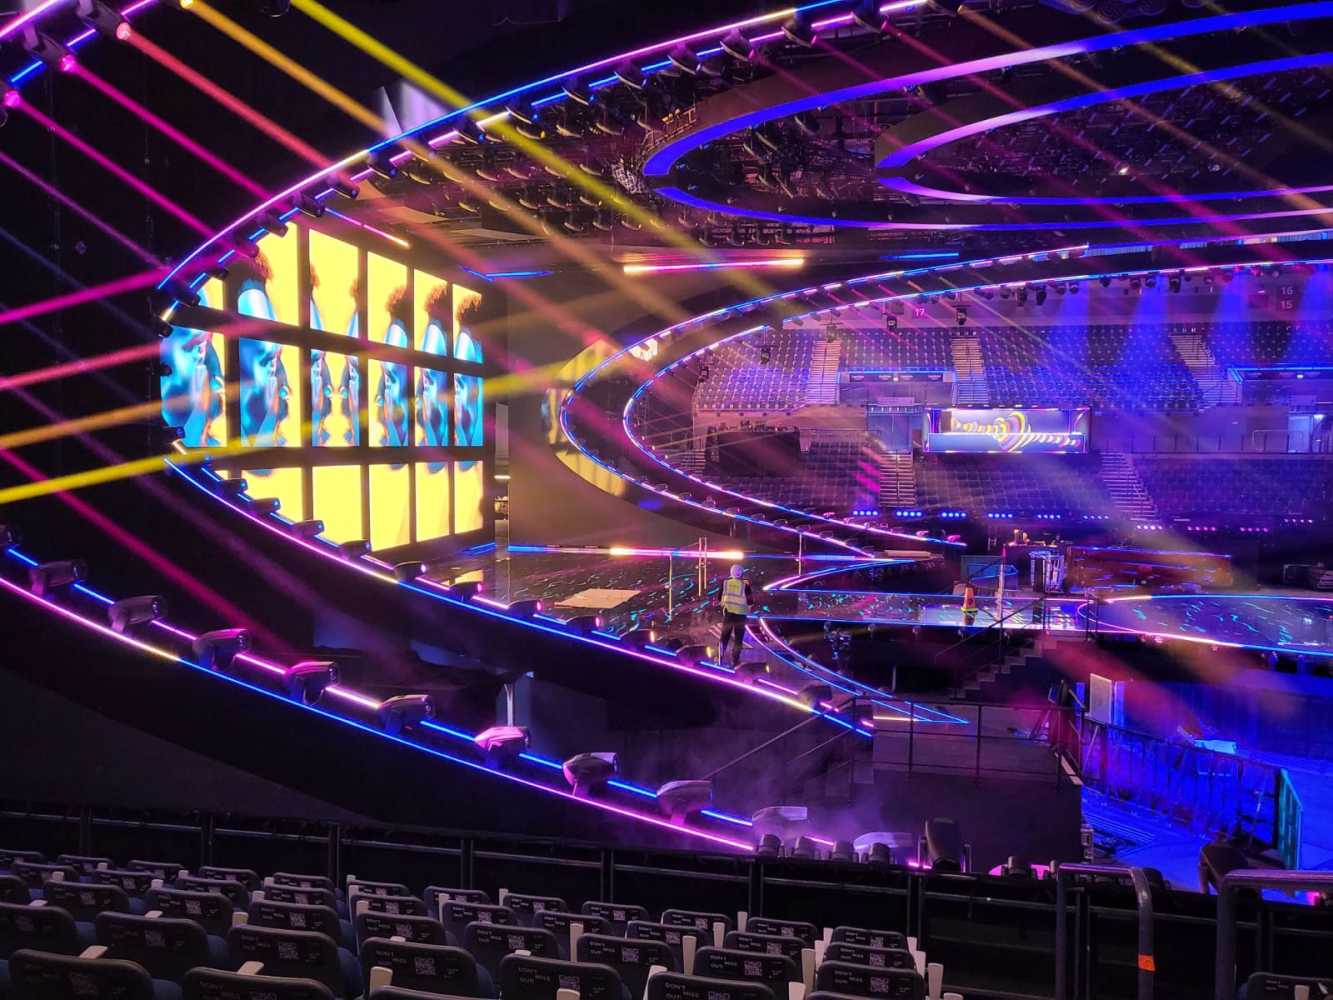 During the live event, Unusual had the task of operating the inner oval, the lighting pods and the on-stage lighting trusses